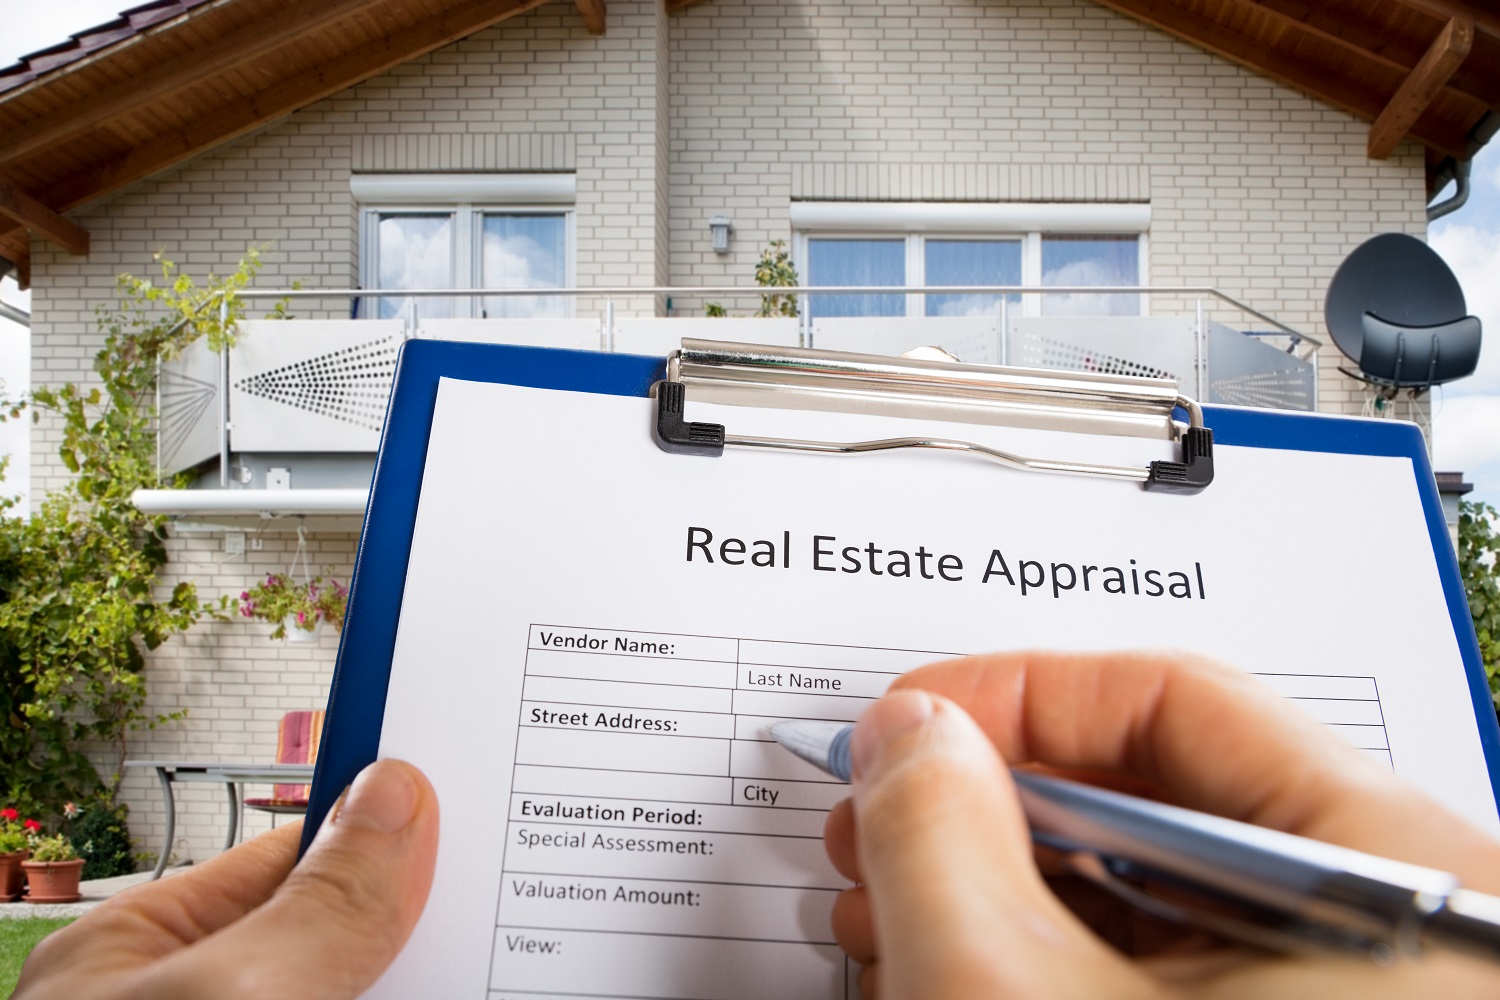 What Does an Appraiser Look For